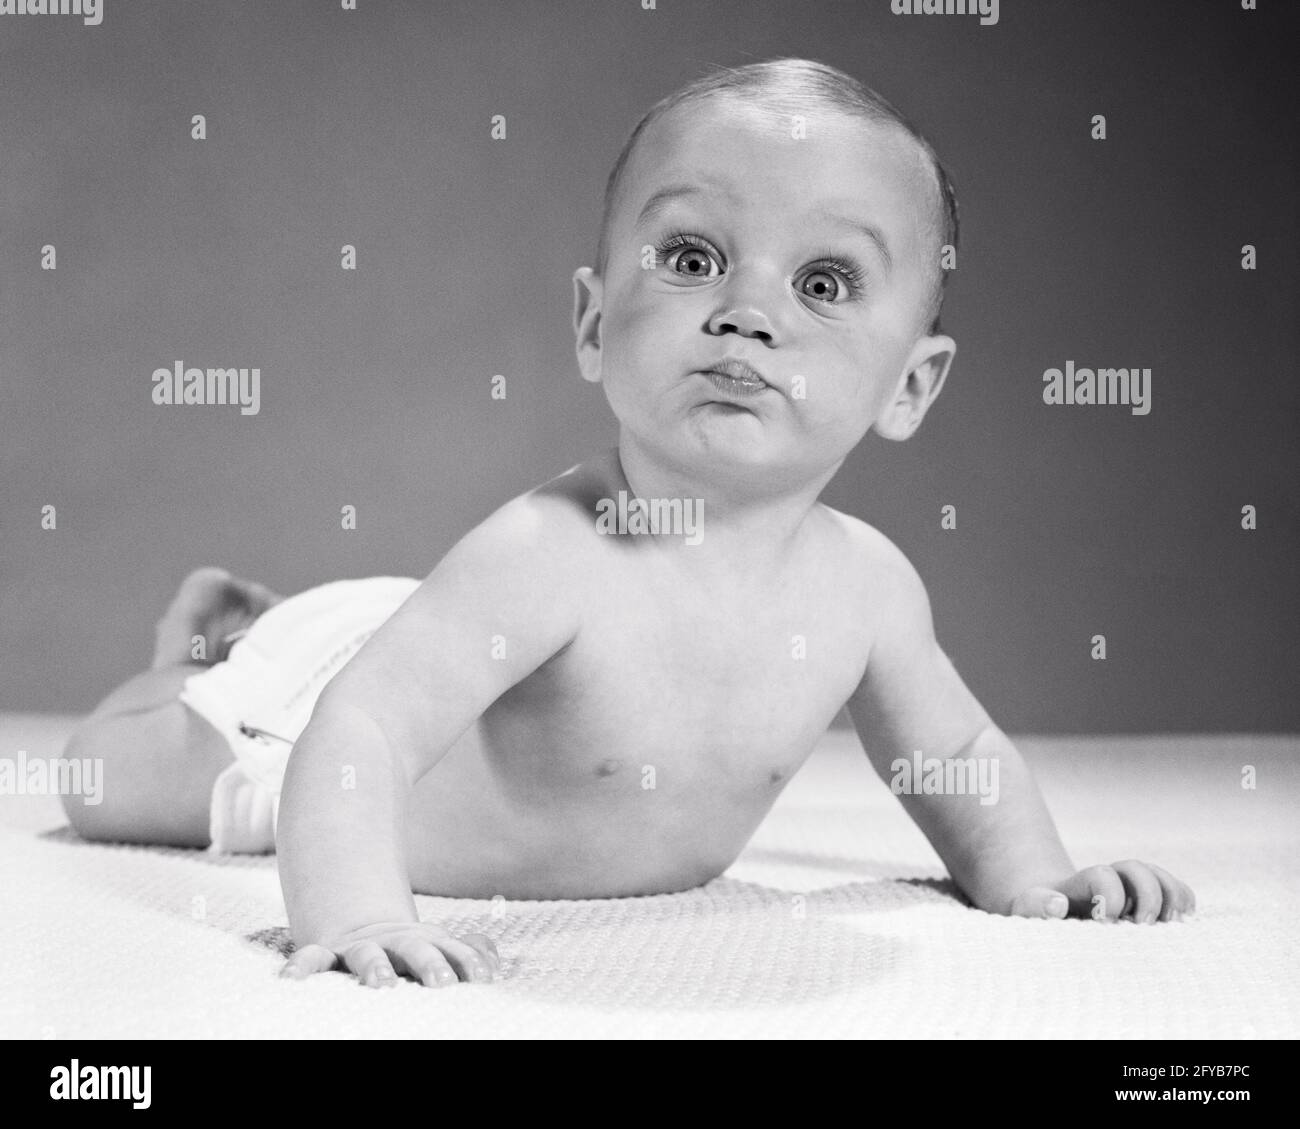 1960s BABY LYING ON STOMACH FUNNY FACIAL EXPRESSION BIG EYES AND PURSED  LIPSLLOKING AT CAMERA - b22299 HAR001 HARS B&W WIDE BUG-EYED HUMOROUS  STOMACH COMICAL PURSED DIAPERS ANIMATED COMEDY BABY BOY WIDE-EYED